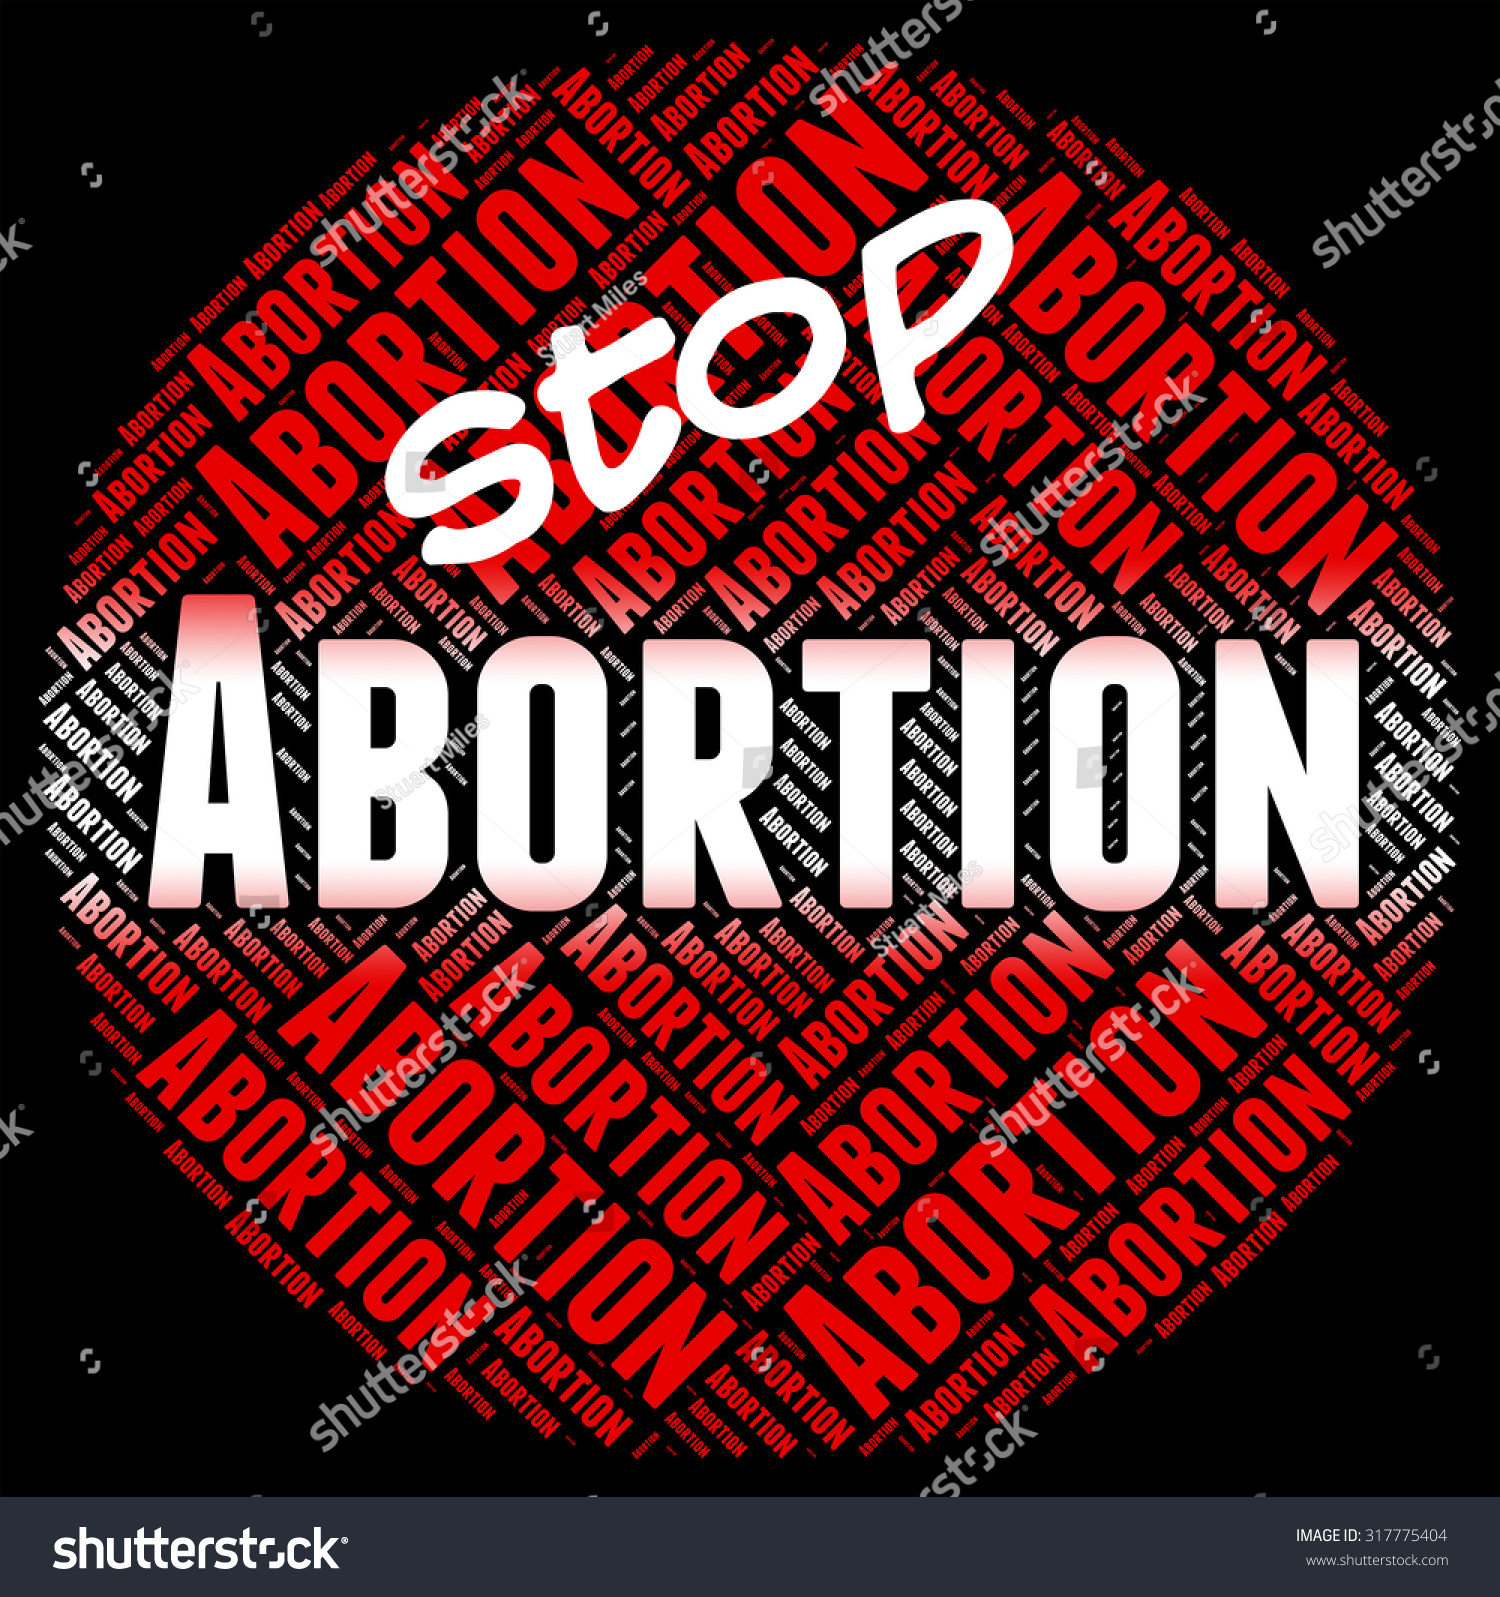 Stop Abortion Representing Warning Sign Control Stock Illustration ...